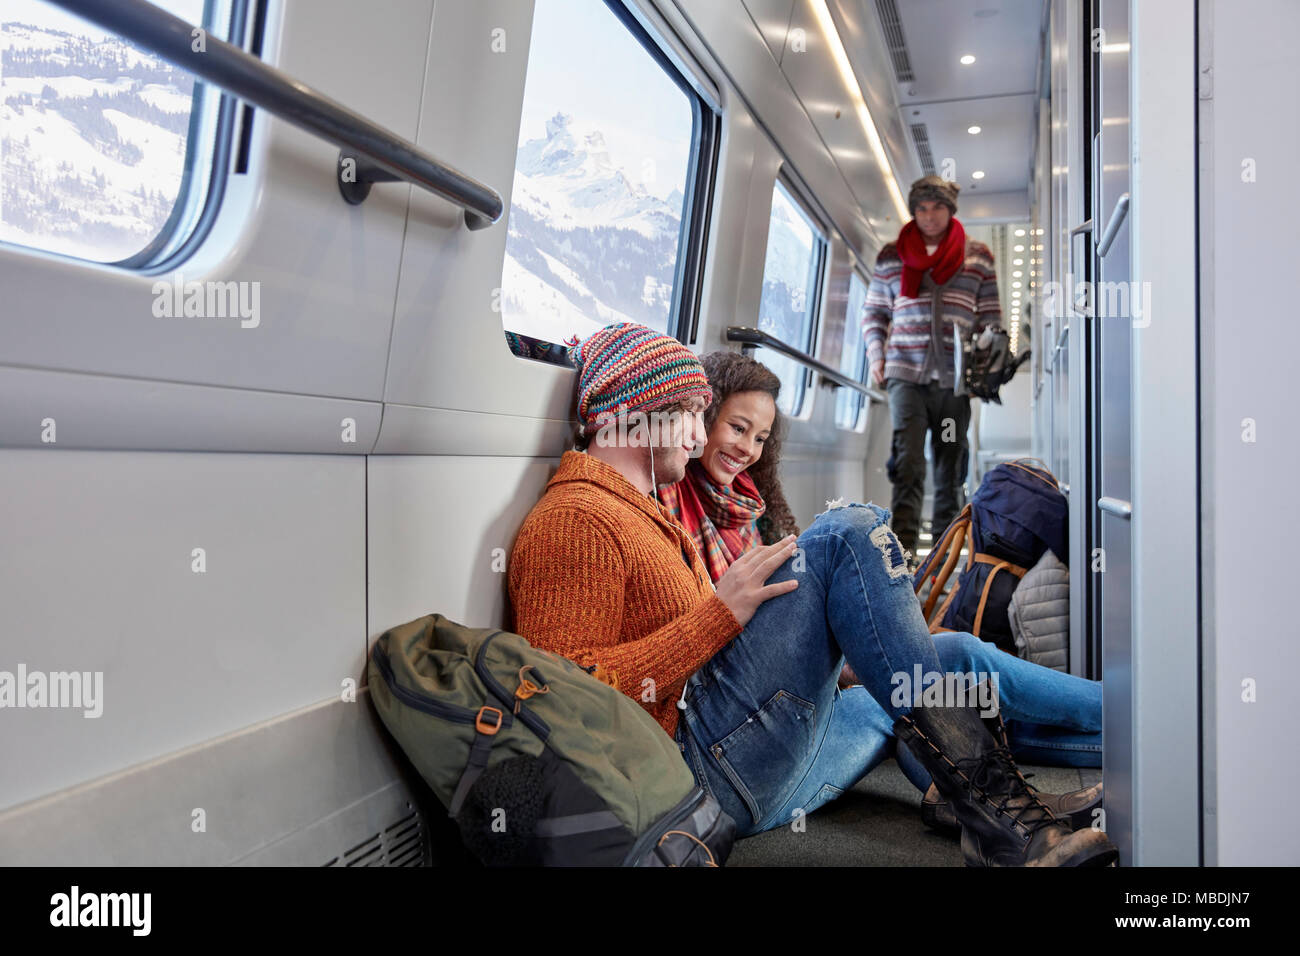 Young couple backpacking, riding passenger train Stock Photo